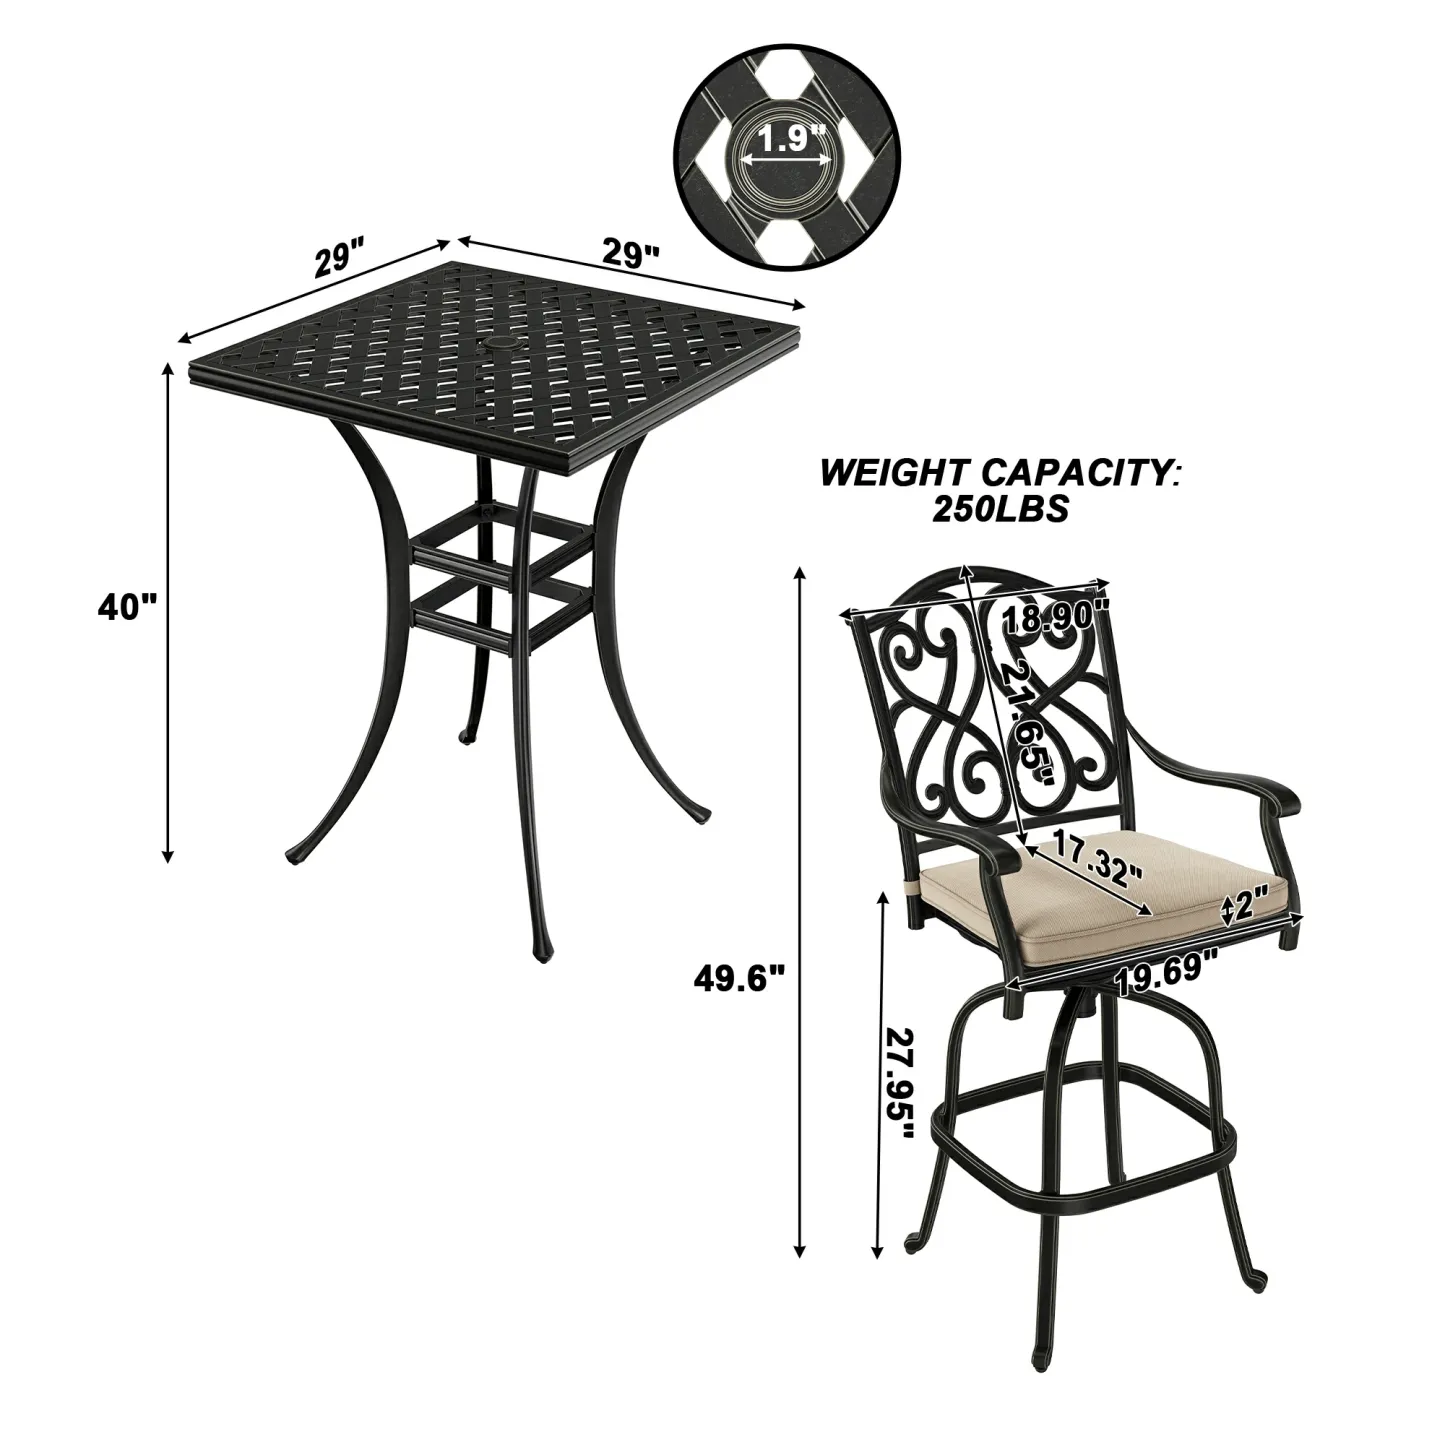 3-Piece Patio Bistro Set Cast Aluminum 2 High Bar Swivel Chairs with Cushion and 1 Square Table